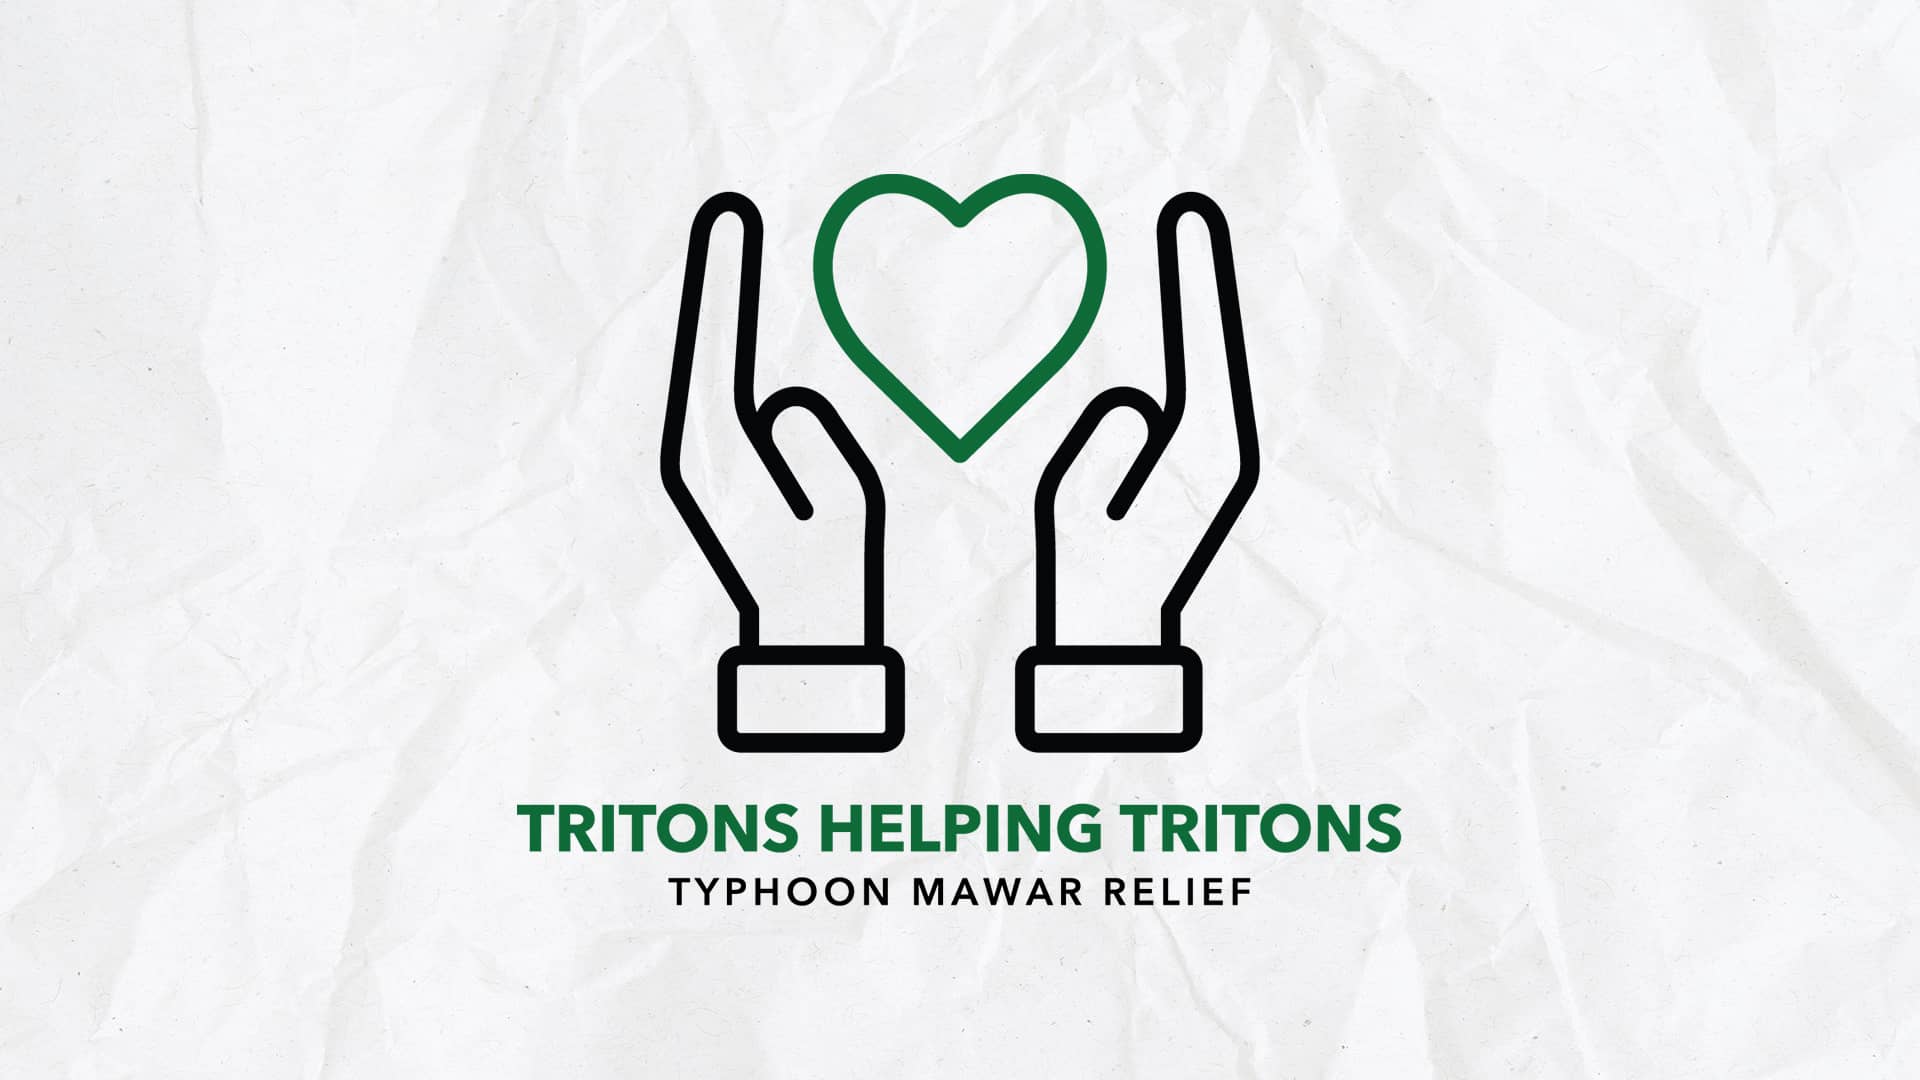 Tritons Helping Tritons: Typhoon Mawar Relief